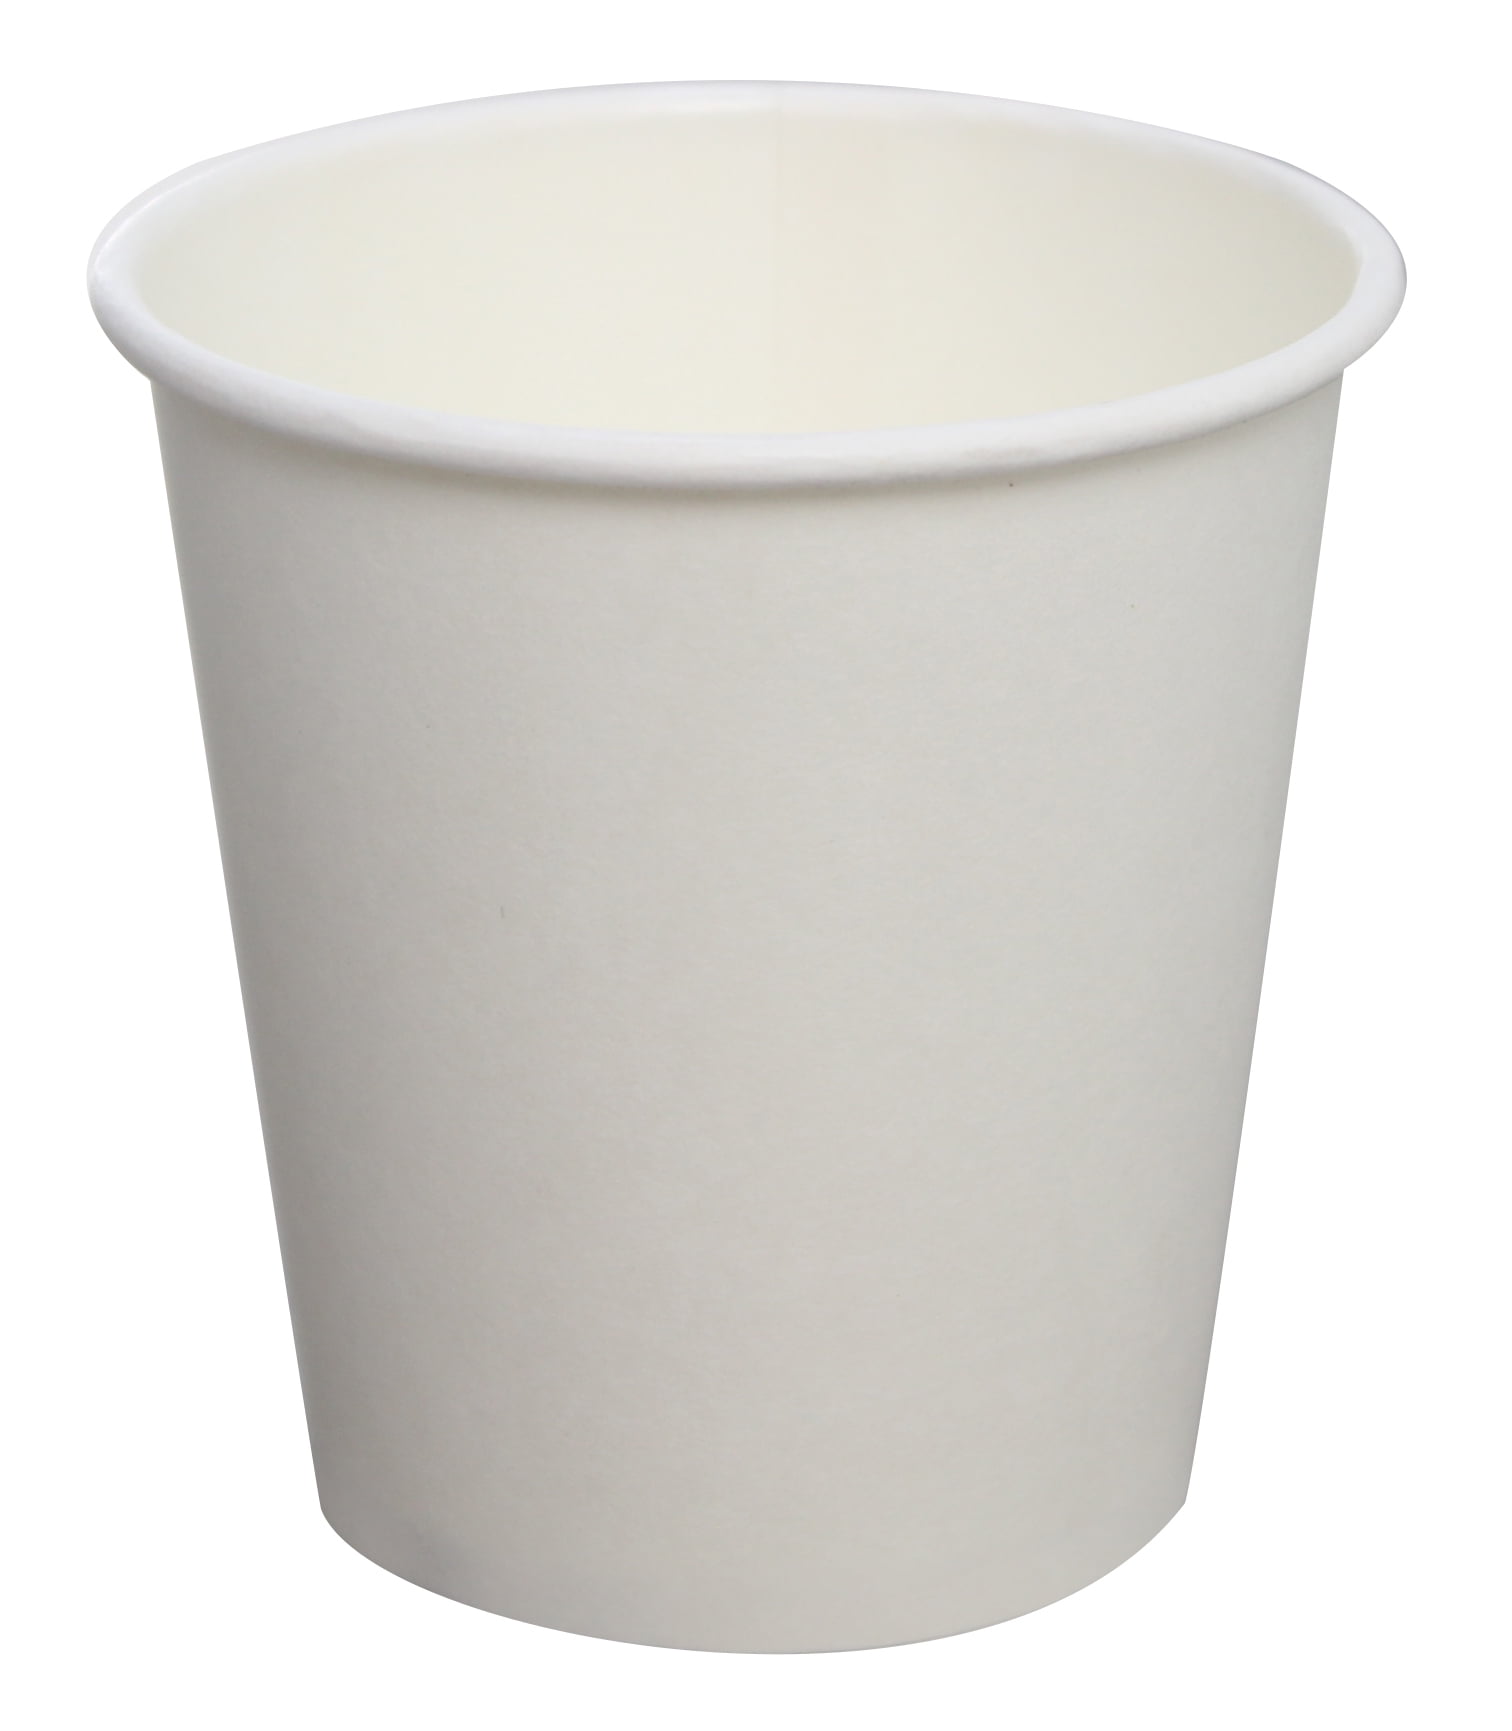 SOLO Cup Company 378HSM-J8000 Hot Cups, with Paper Handle, Symphony Design,  8 Oz. - 1 Case (1000 Cups) 